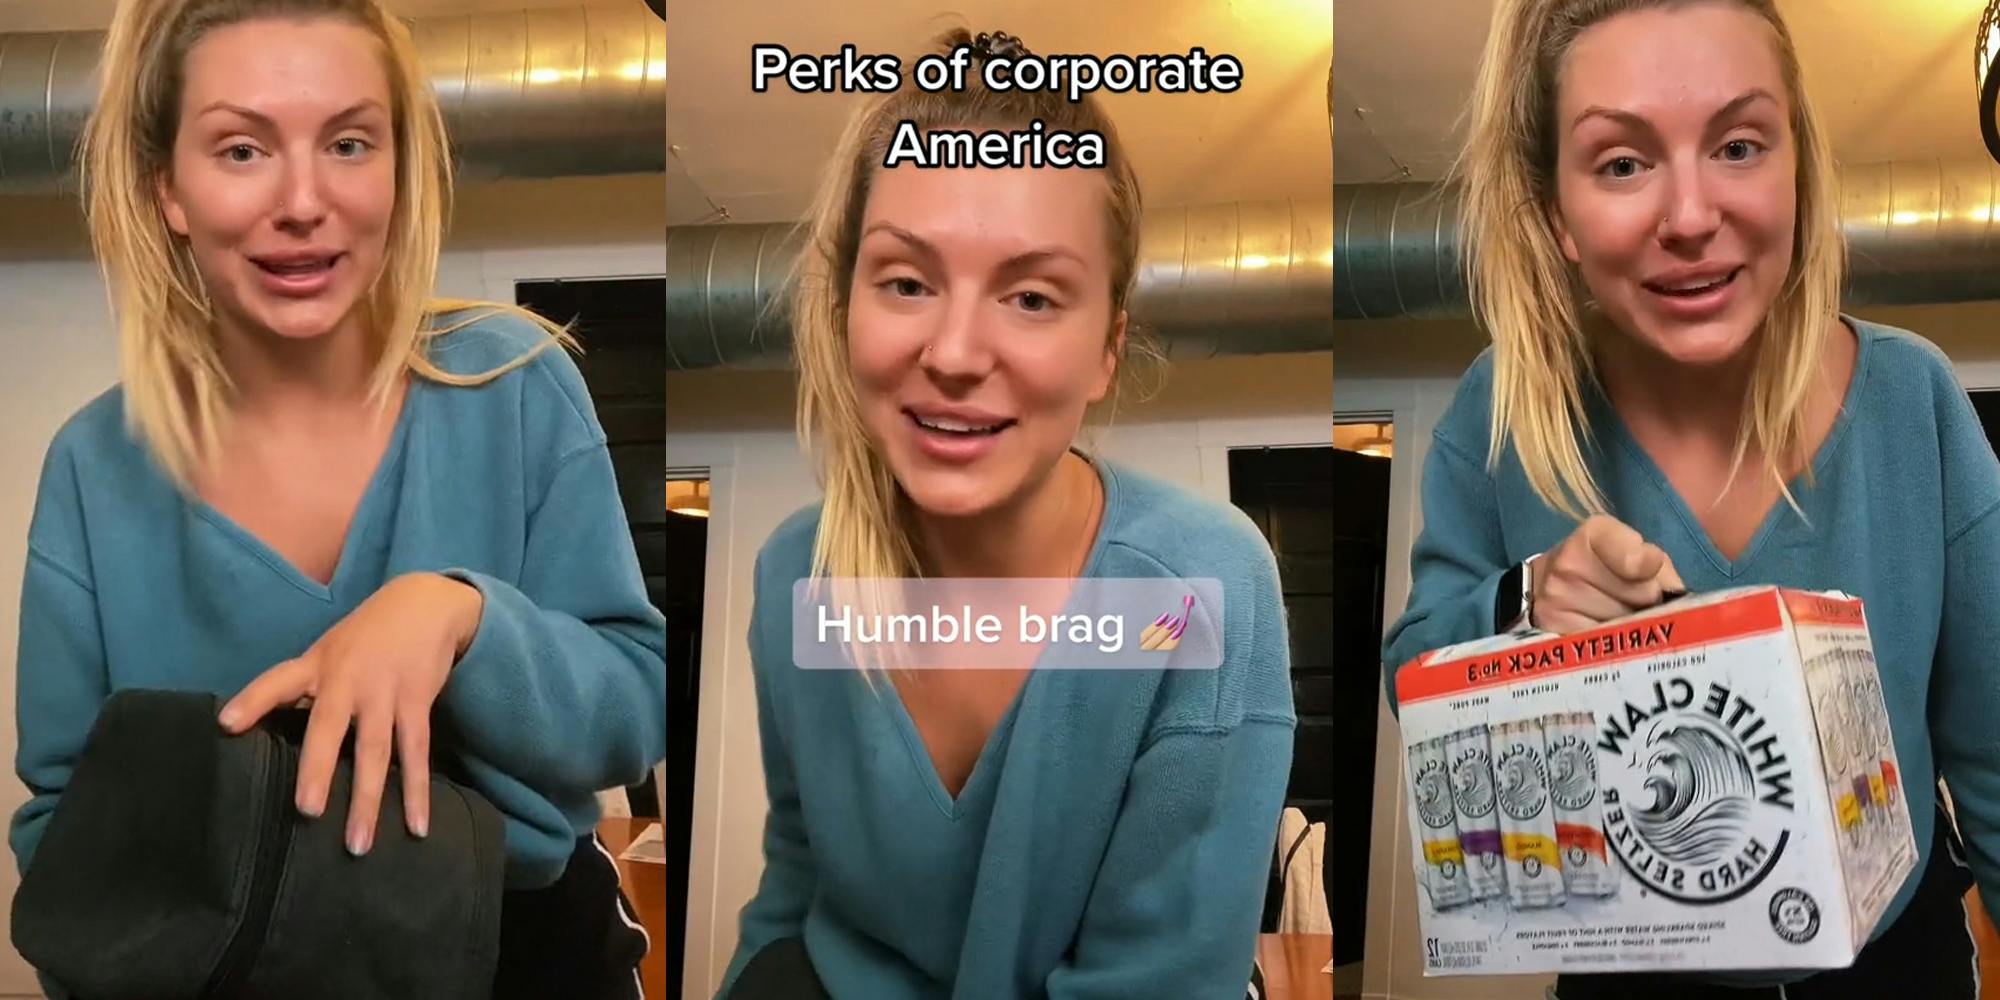 woman speaking standing holding dark grey bag/case (l) woman standing speaking caption "Perks of corporate America" "Humble brag" (c) woman standing speaking holding case of White Claws (r)